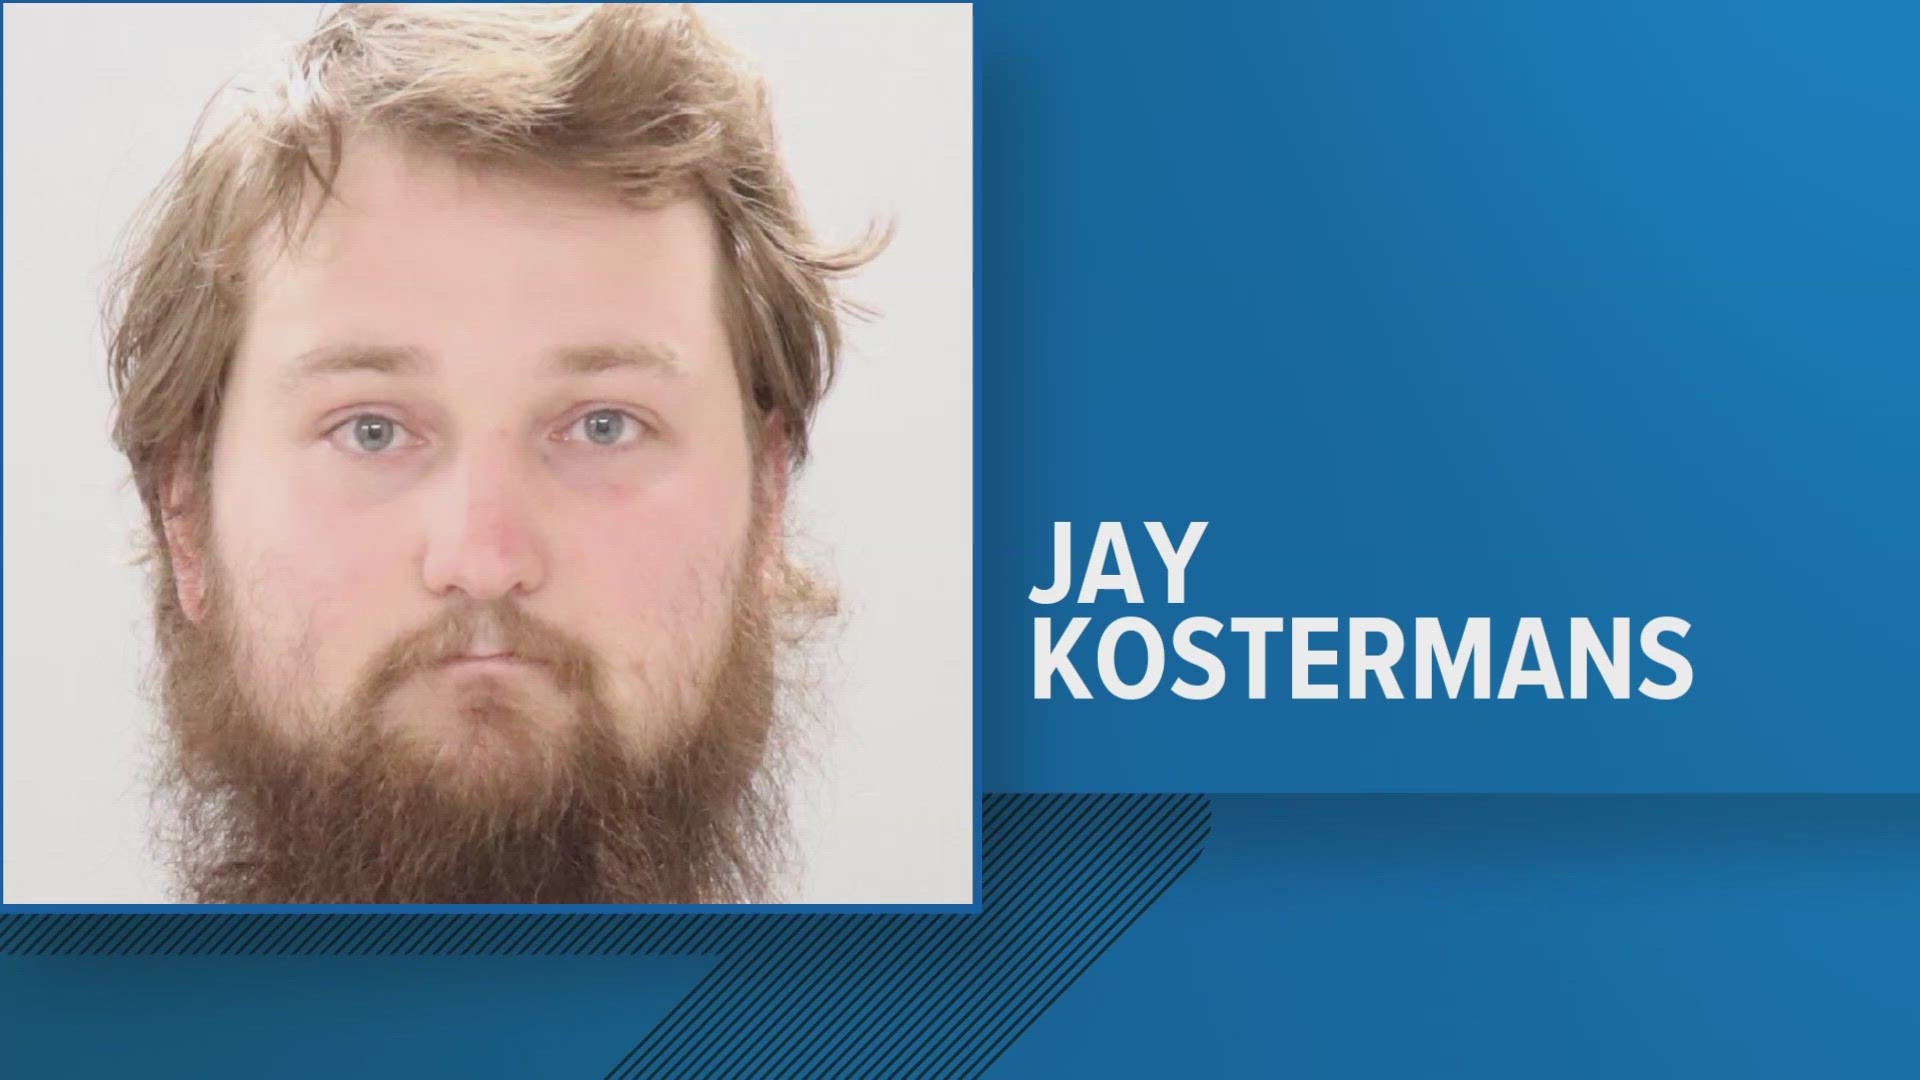 According to an arrest report from the Knox County Sheriff's Office, Jay Kostermans turned on the valves at HVA after a dispute with his mom.